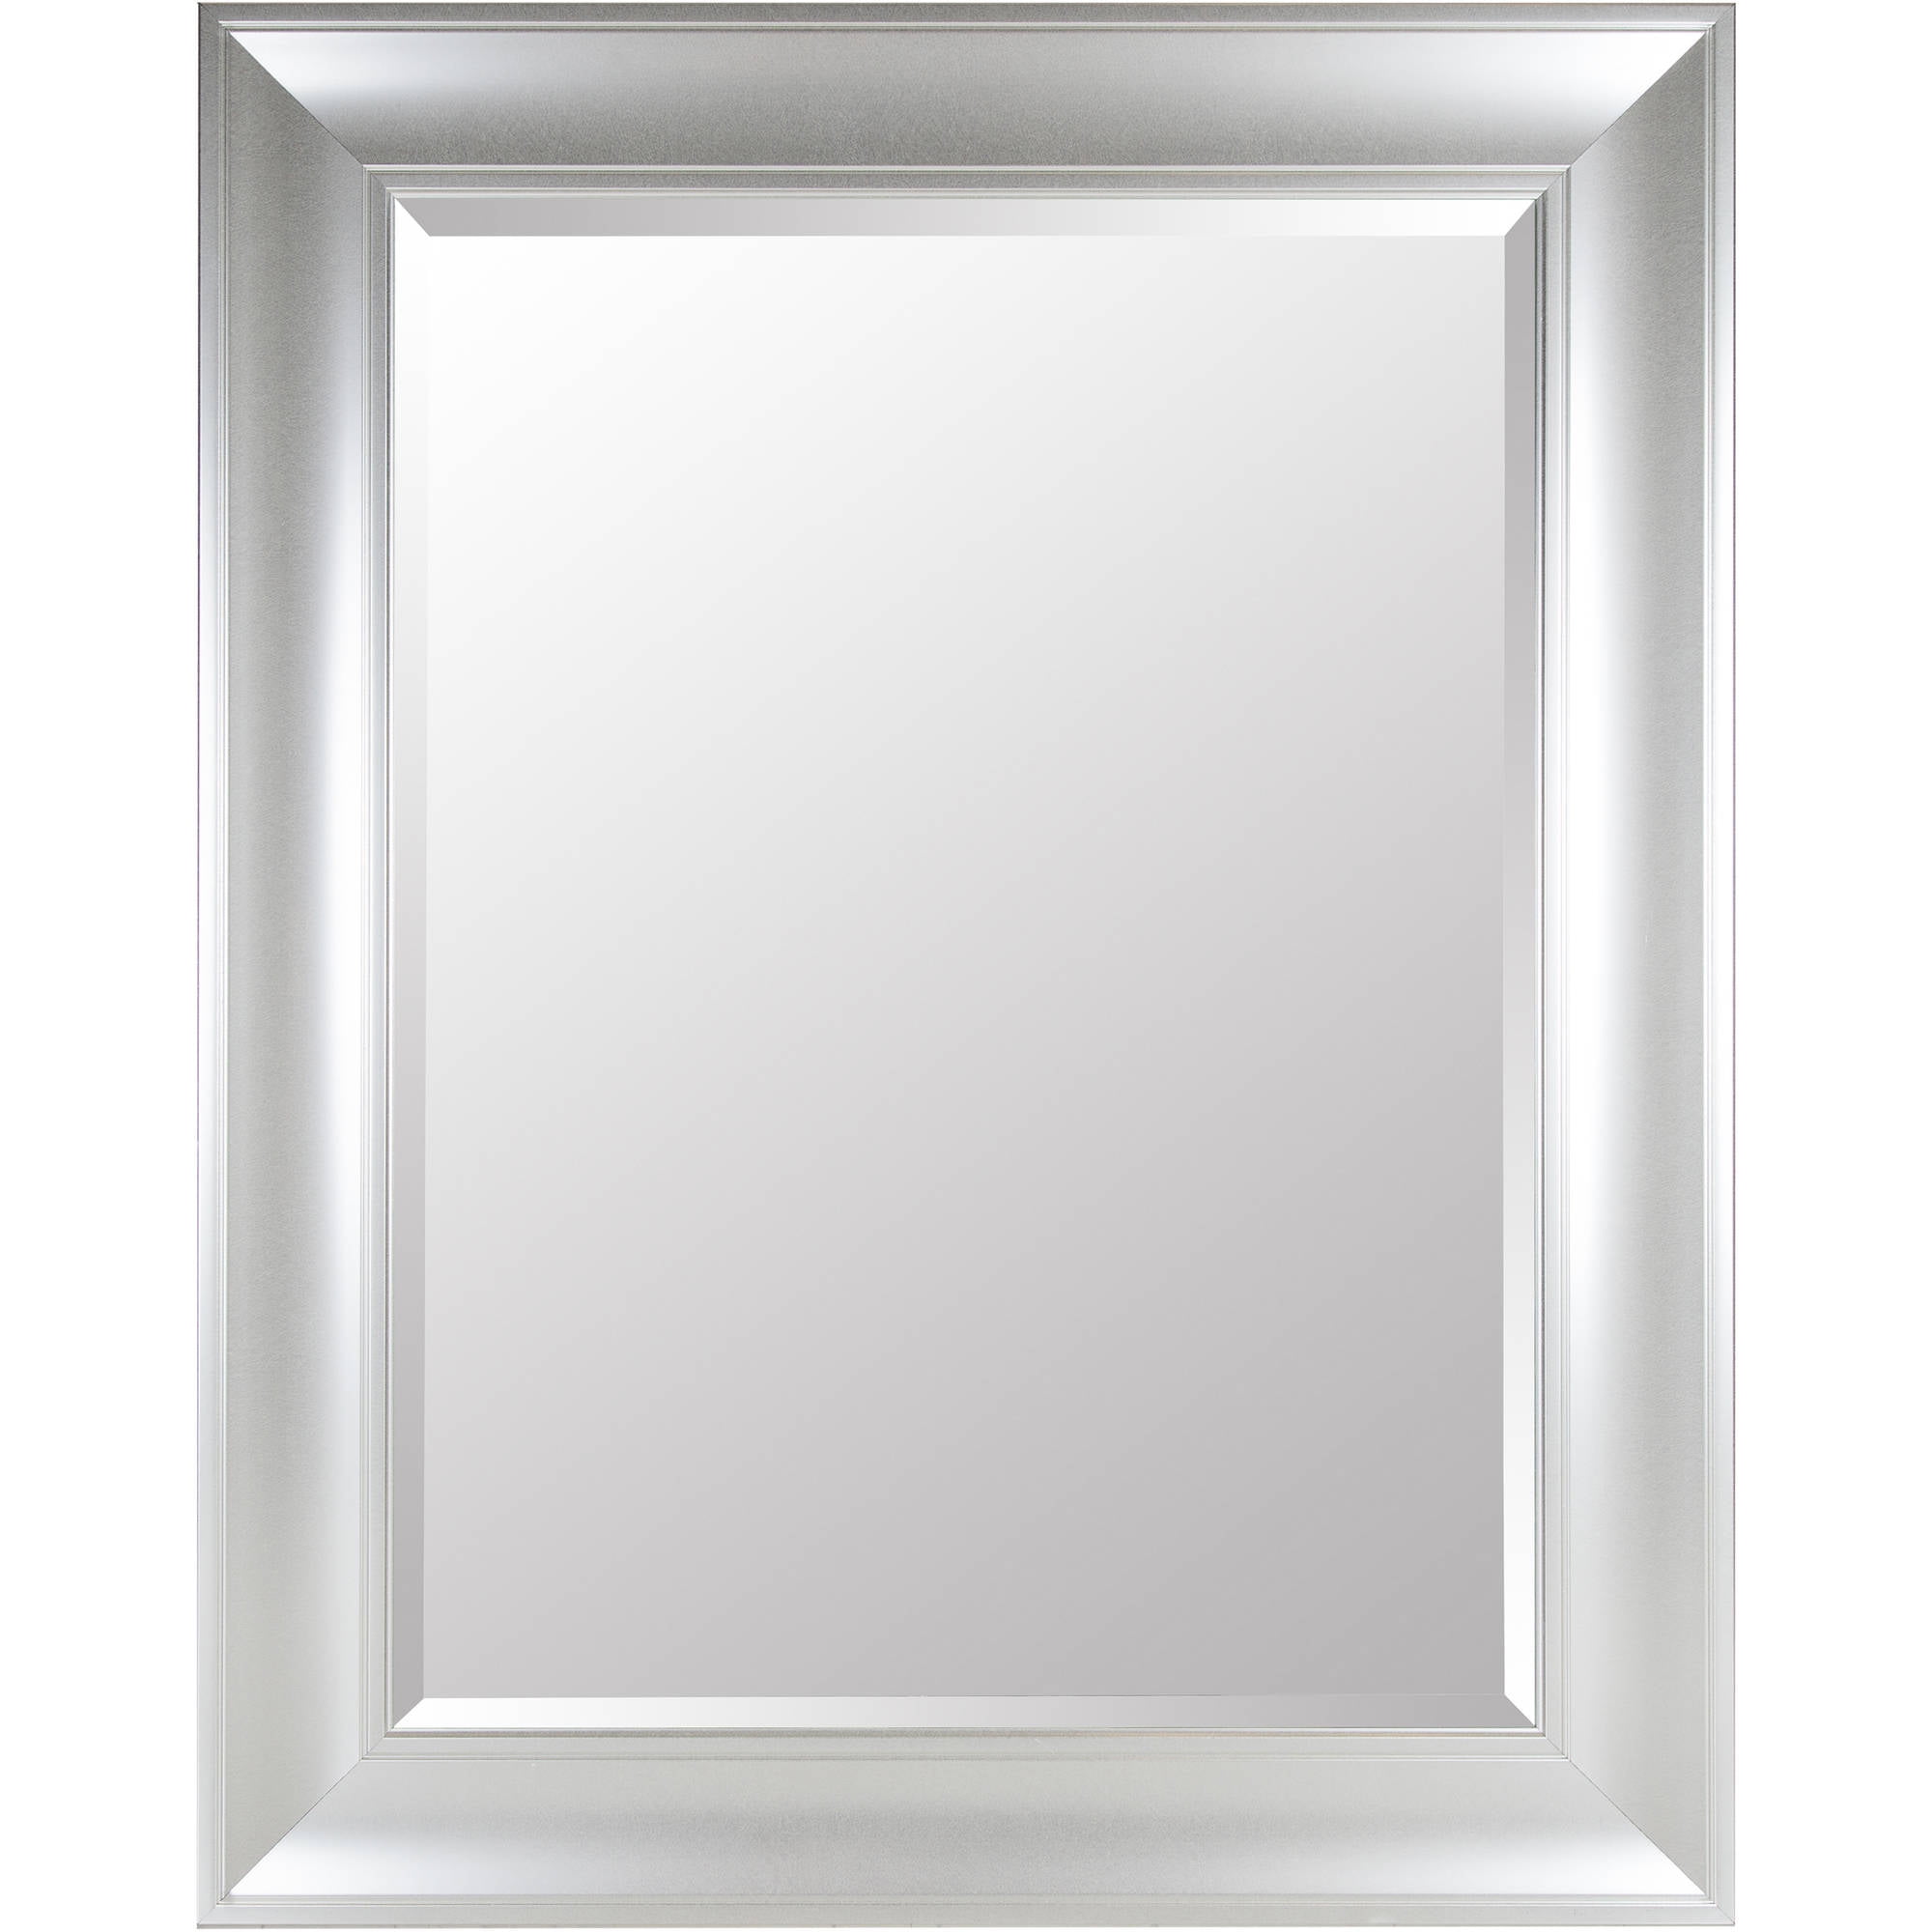 Beveled Wall Mirror with Silver Frame 39"x49" by Gallery Solutions